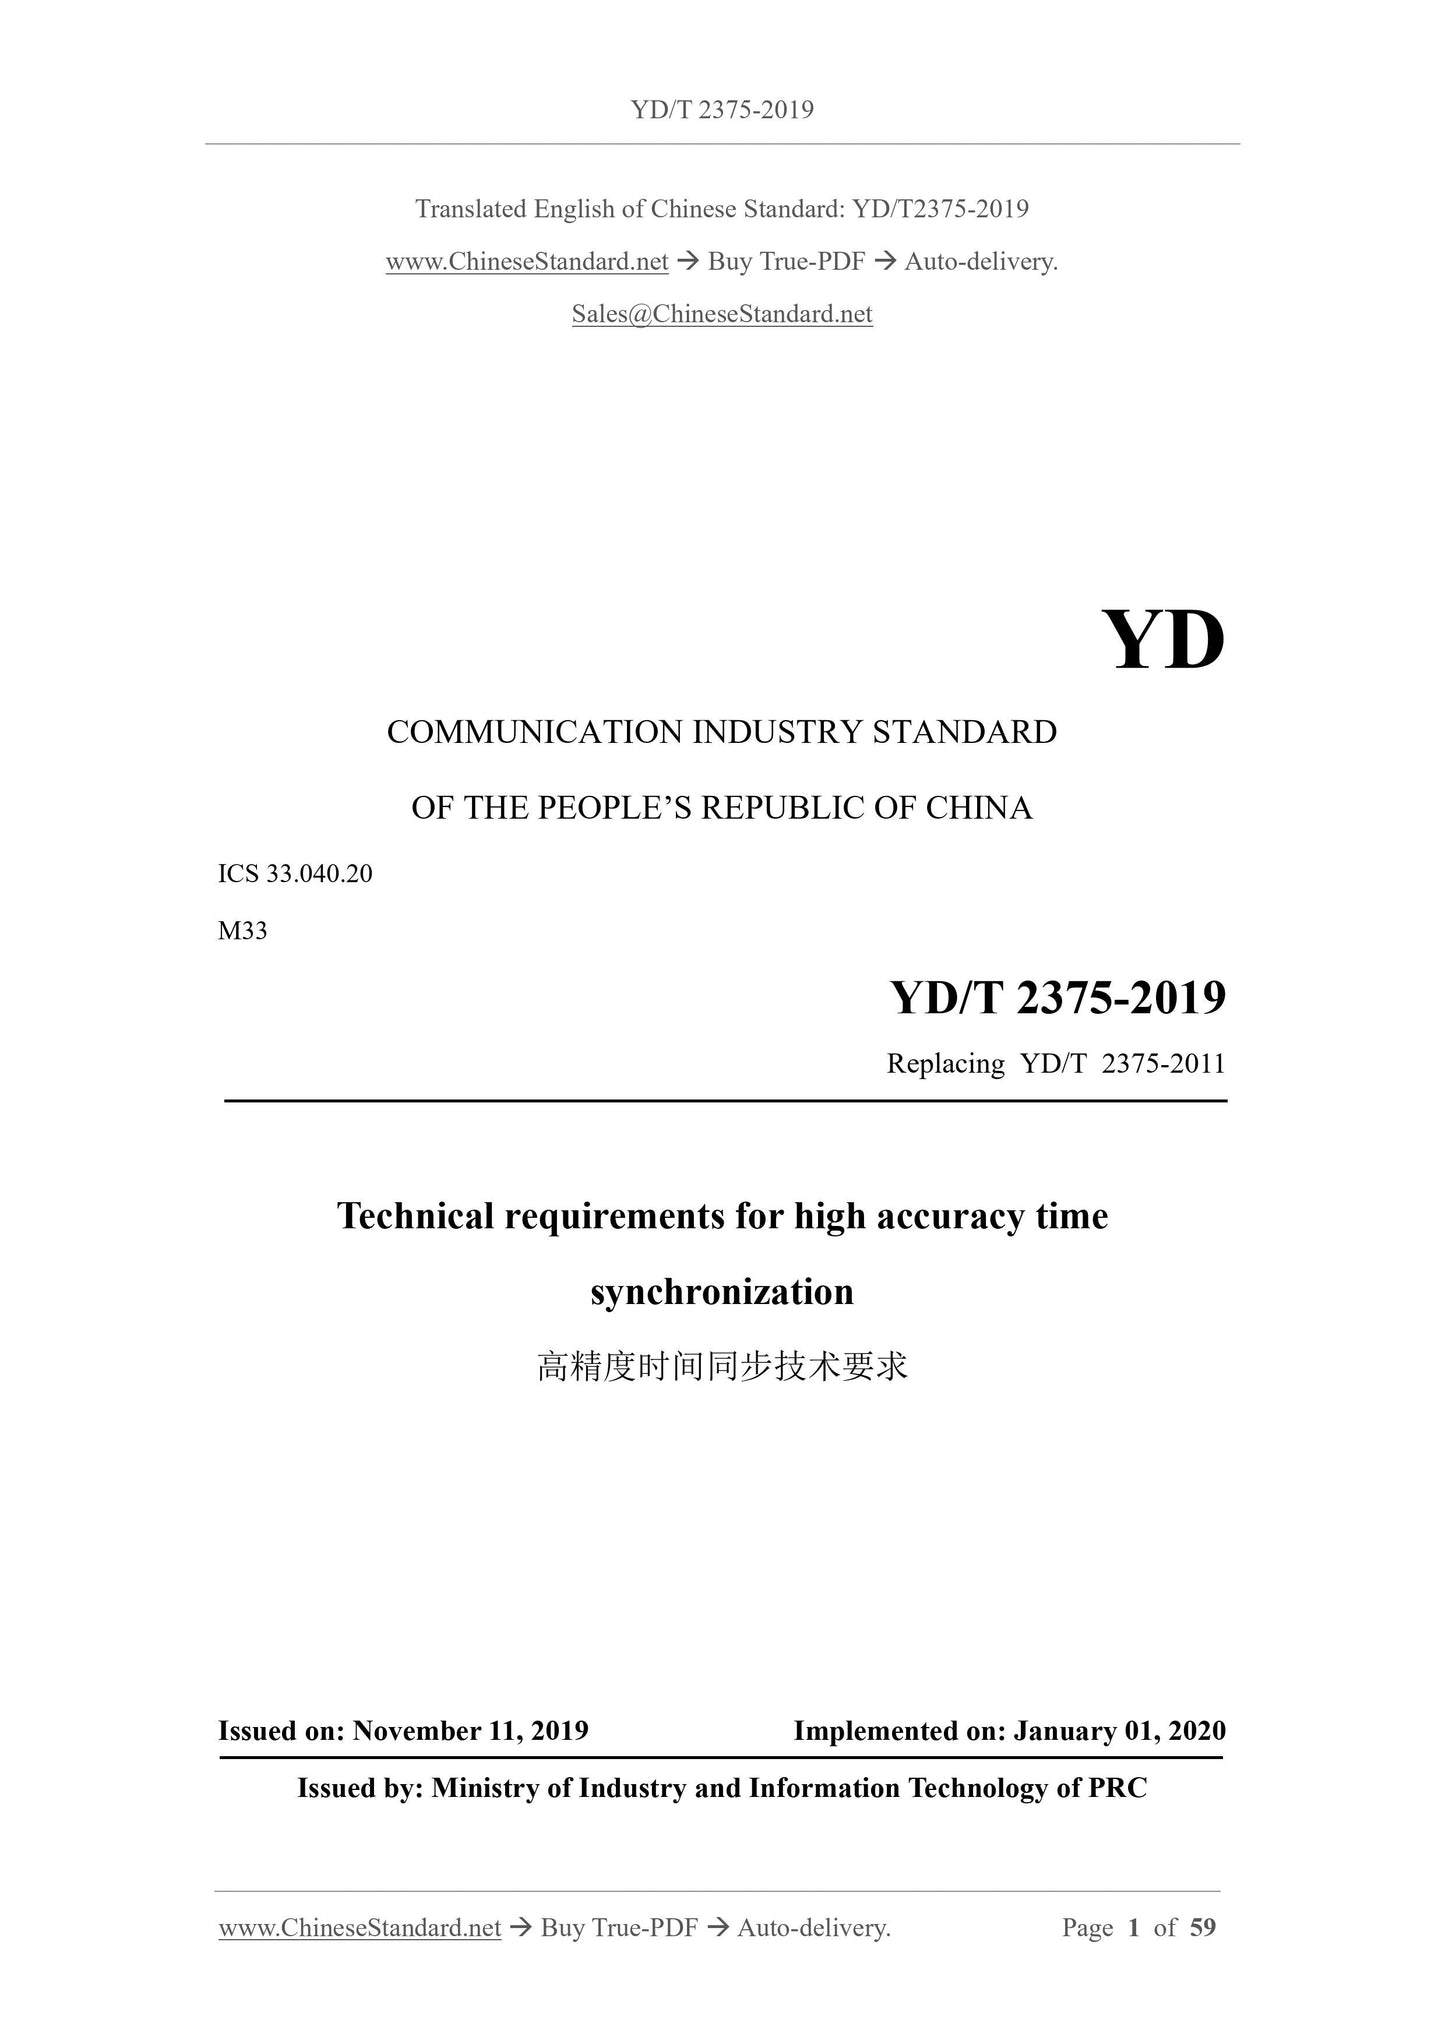 YD/T 2375-2019 Page 1